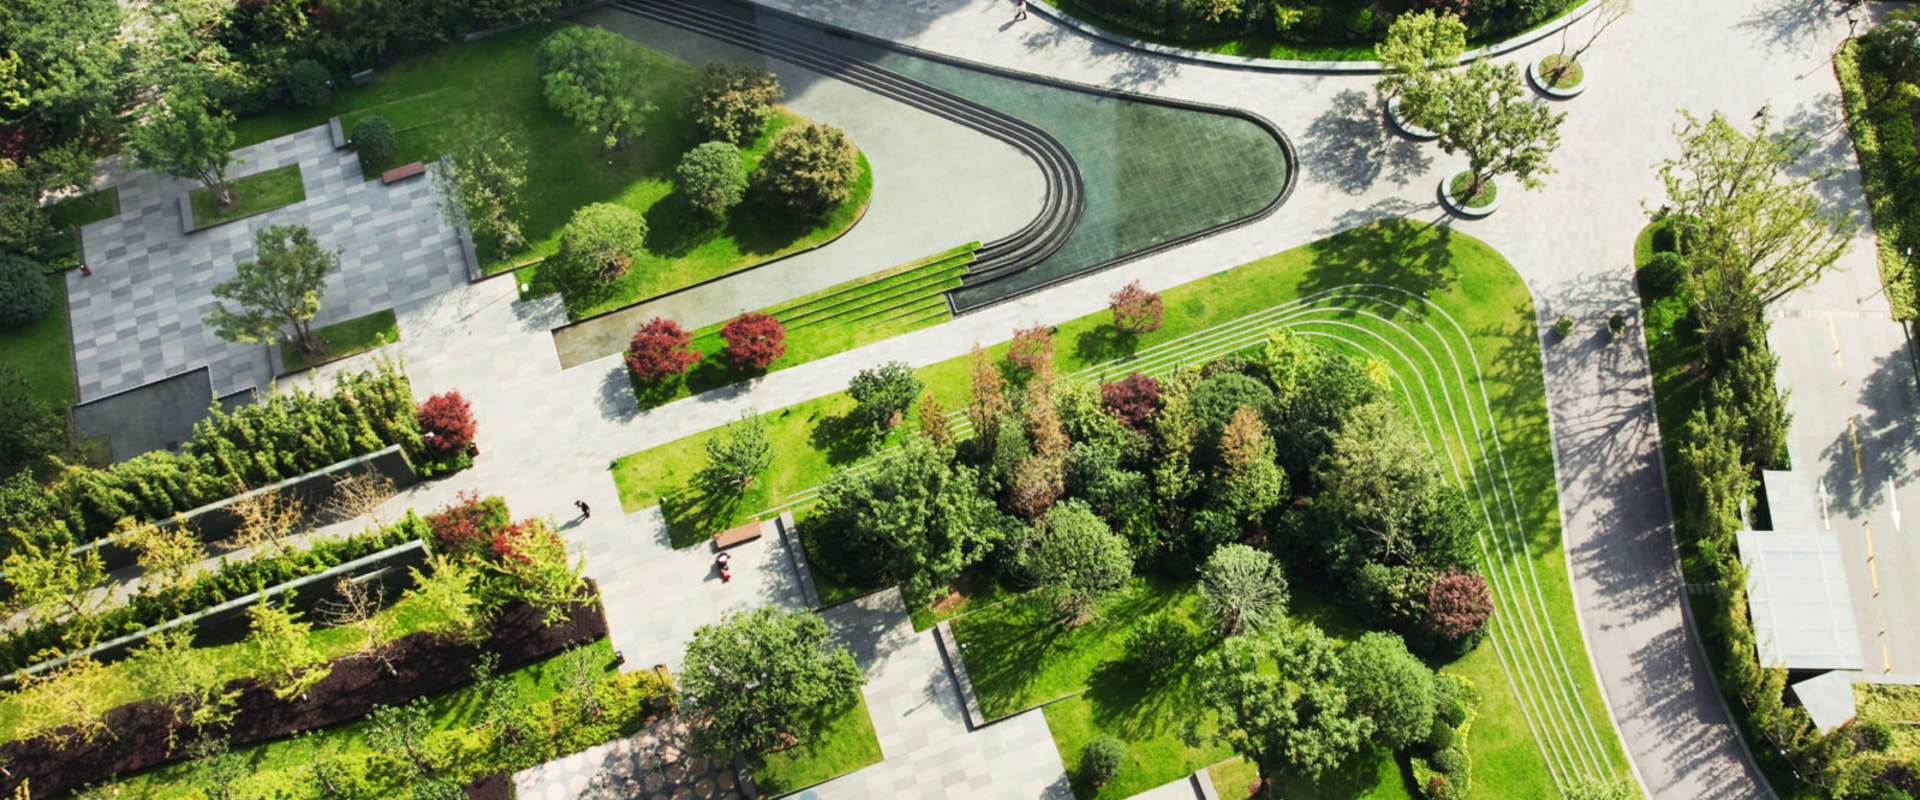 What do you like about landscape architecture?